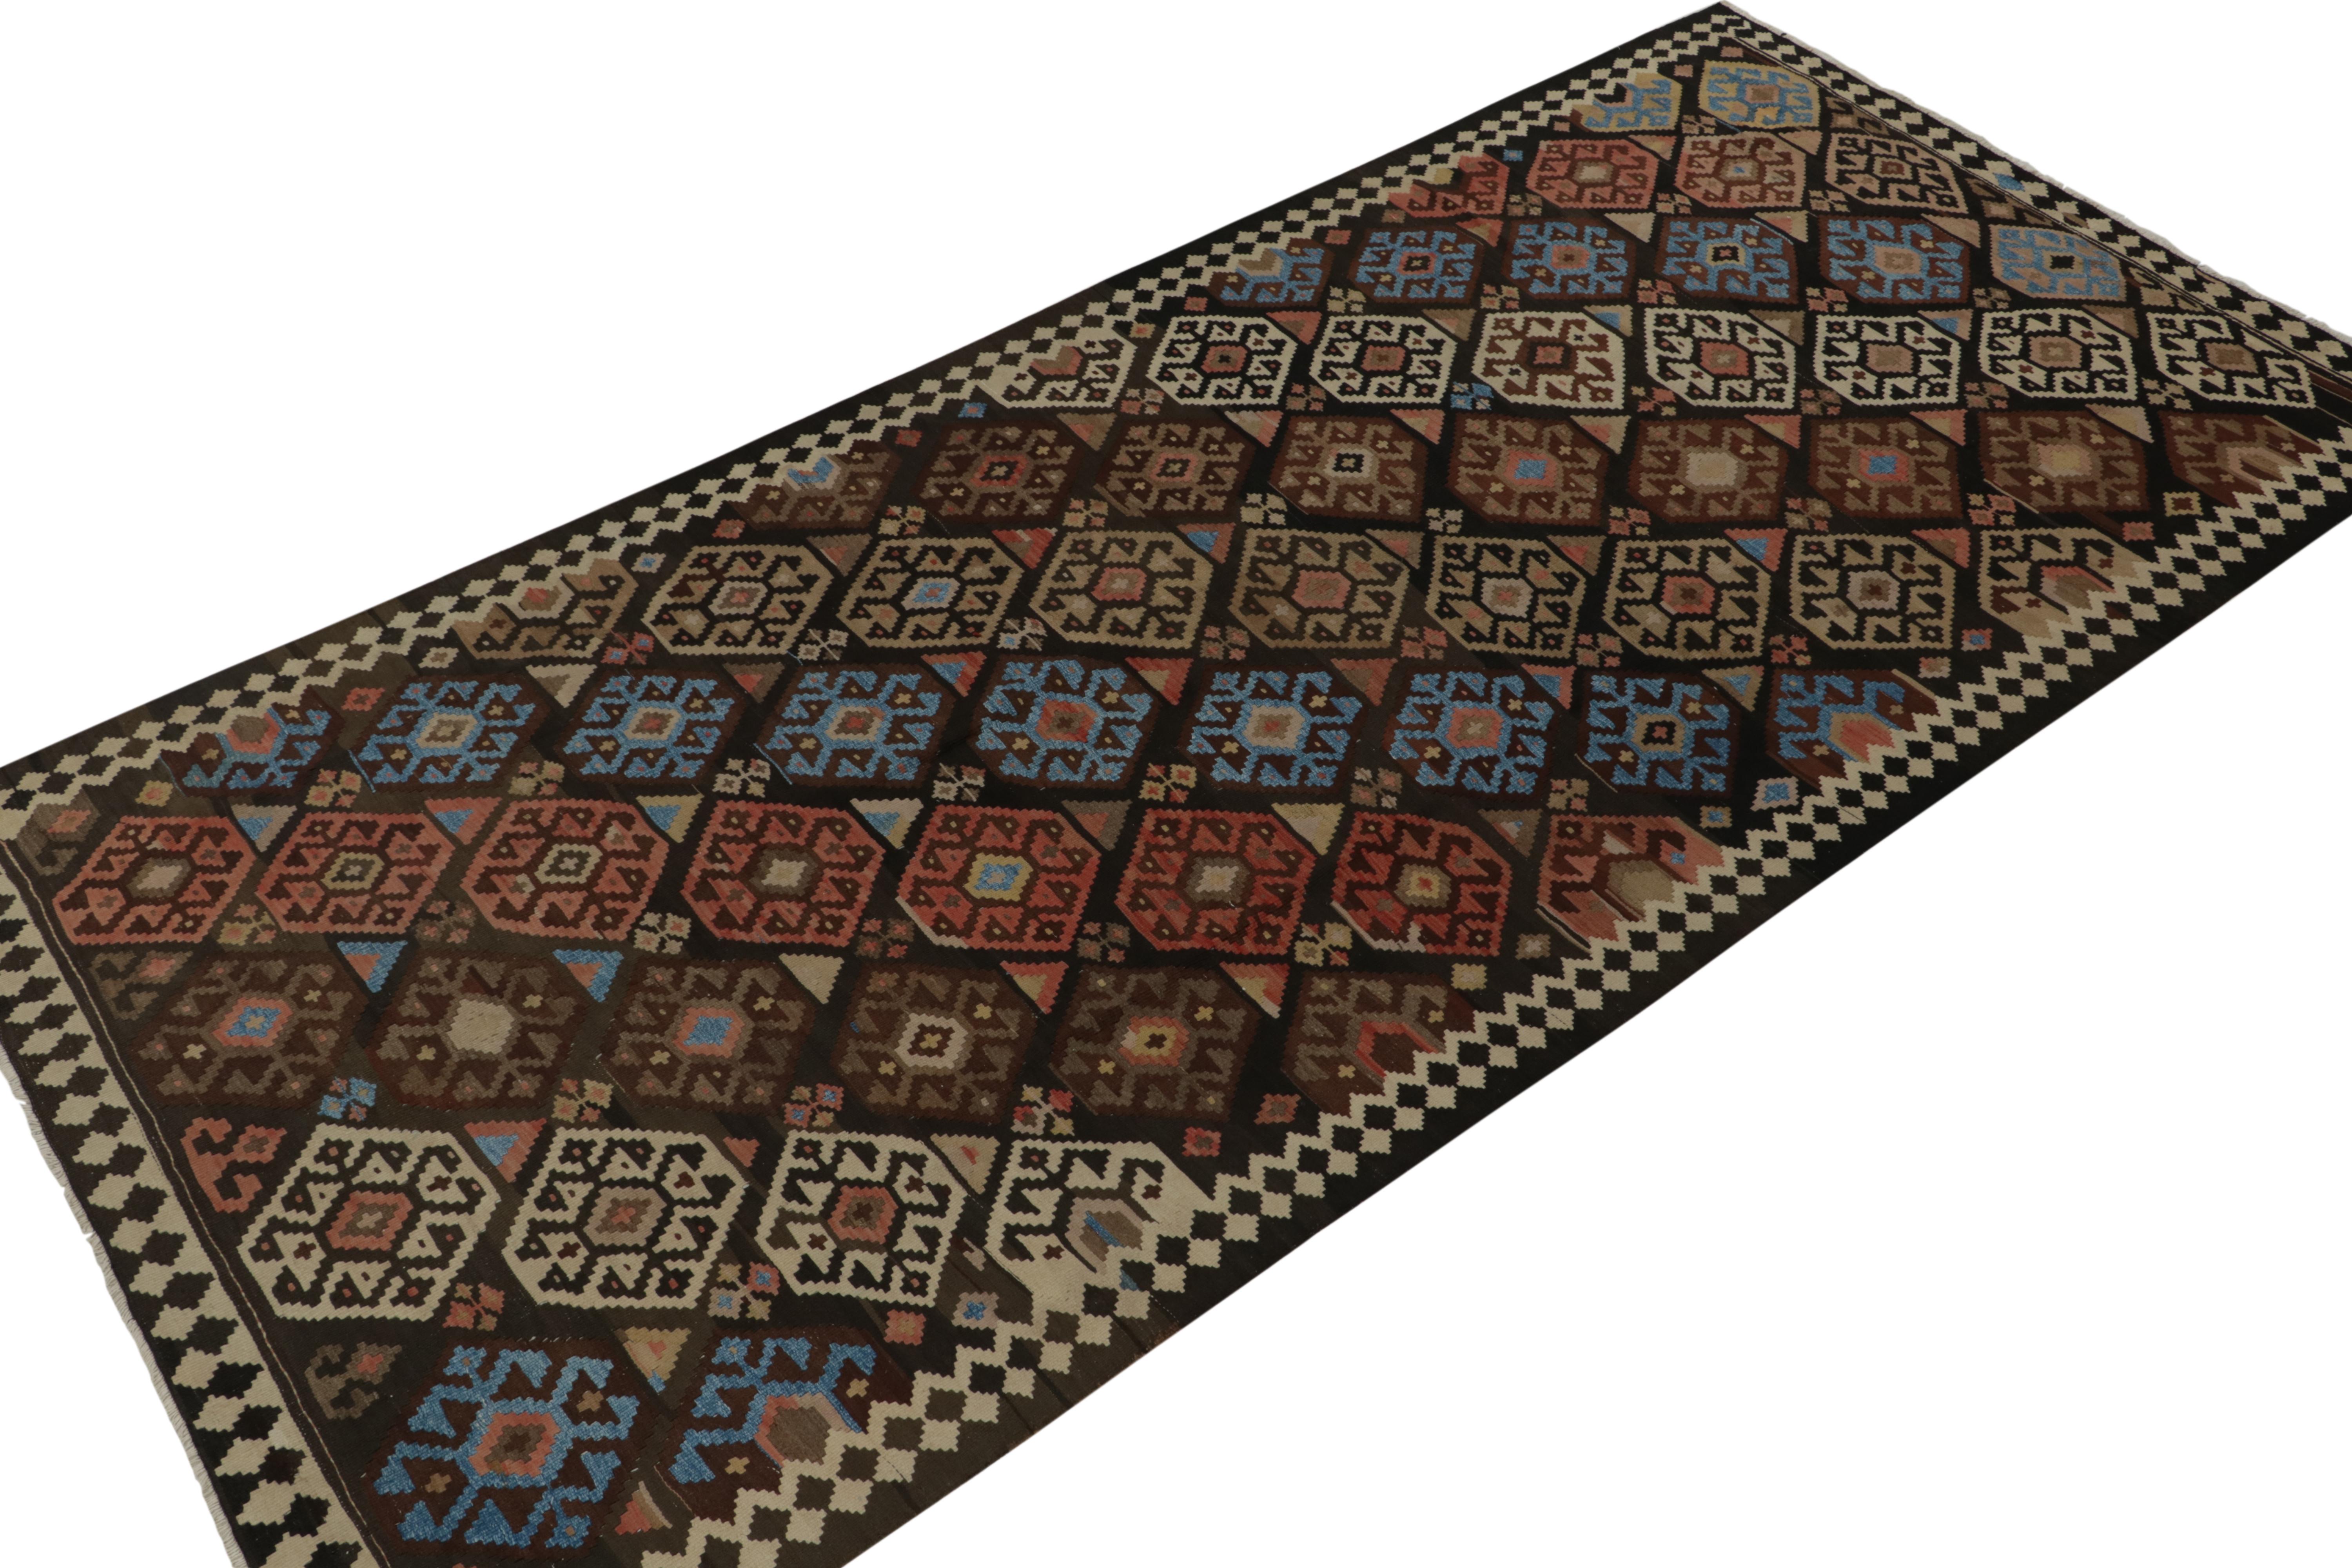 This vintage 6x13 Persian kilim is handwoven in all wool, and originates circa 1950-1960.

Further on the Design:

The design prefers brown tones with brick red, beige, and bright blue accents in diagonal rows of geometric patterns. Keen eyes will